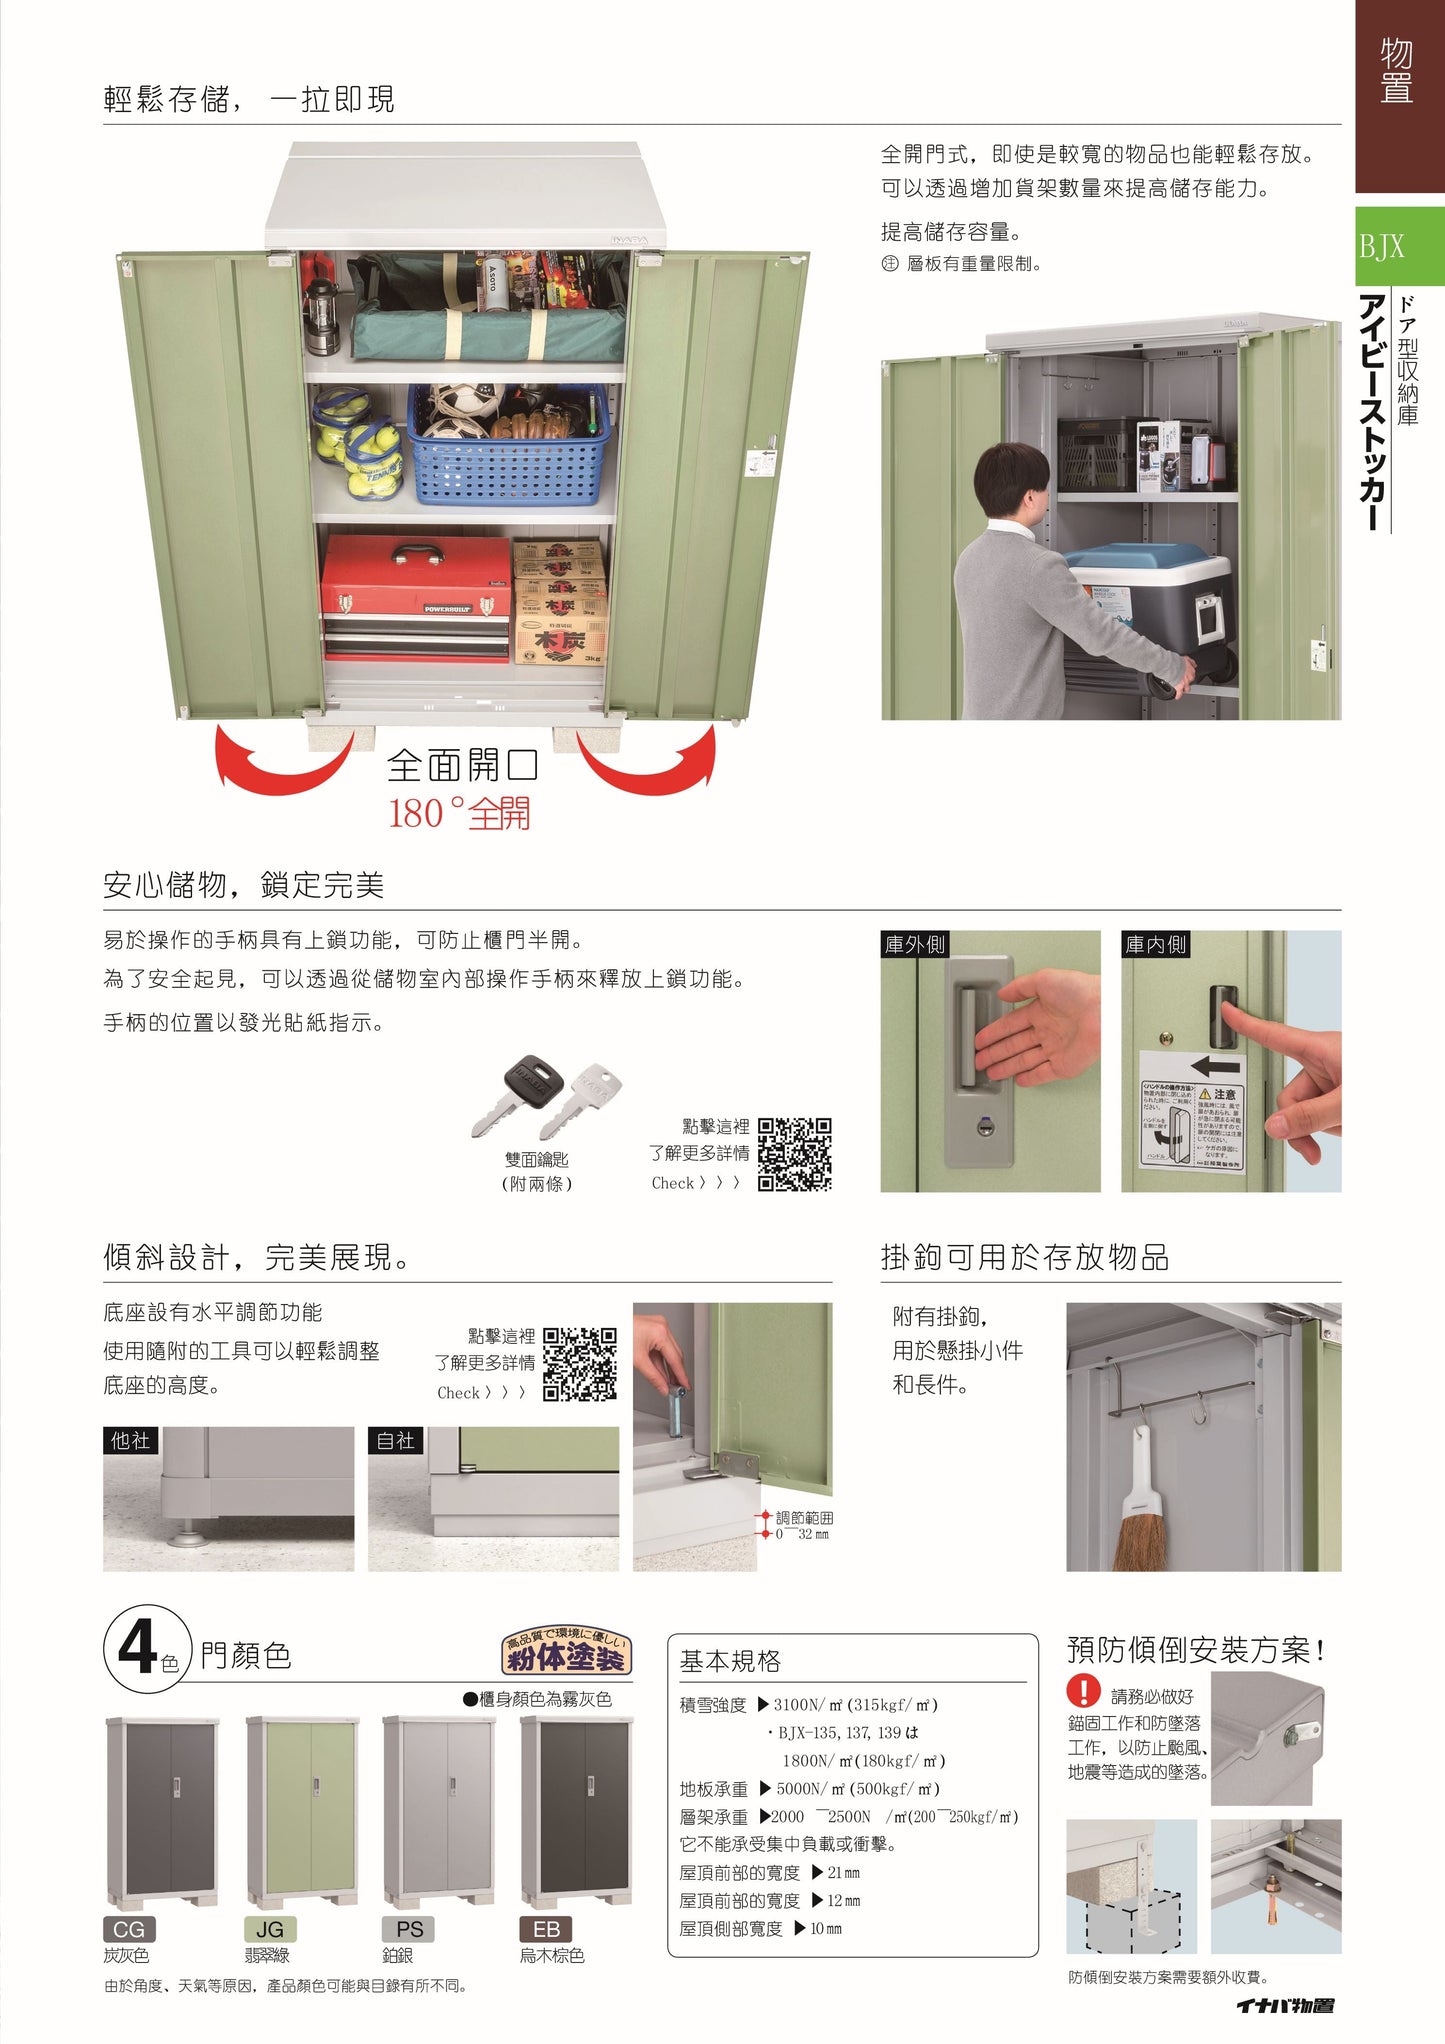 *Pre-order* Inaba Outdoor Storage BJX-095A (W920XD548XH903mm)0.455m3